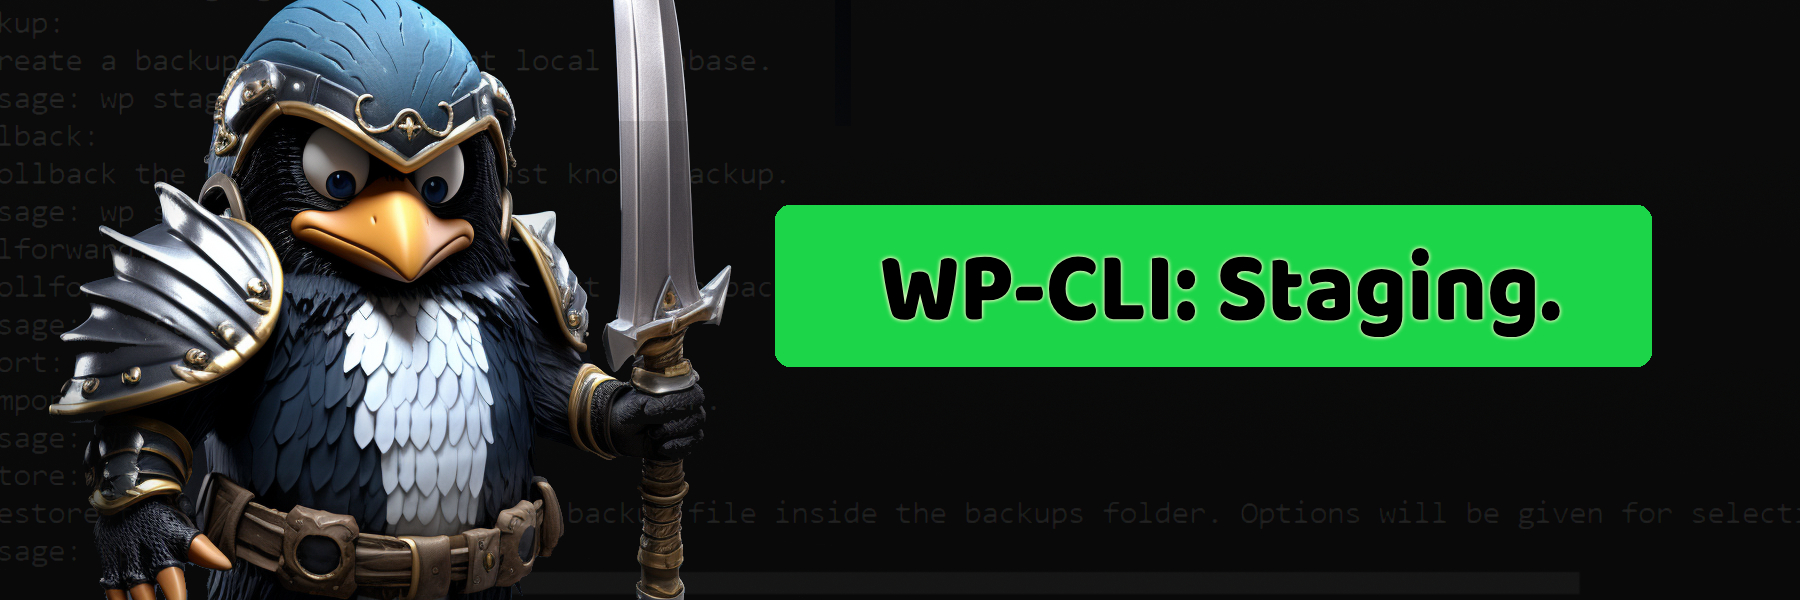 Header image for WP-CLI Staging feating the title of the asset and Penguin wearing armor and holding a spear.